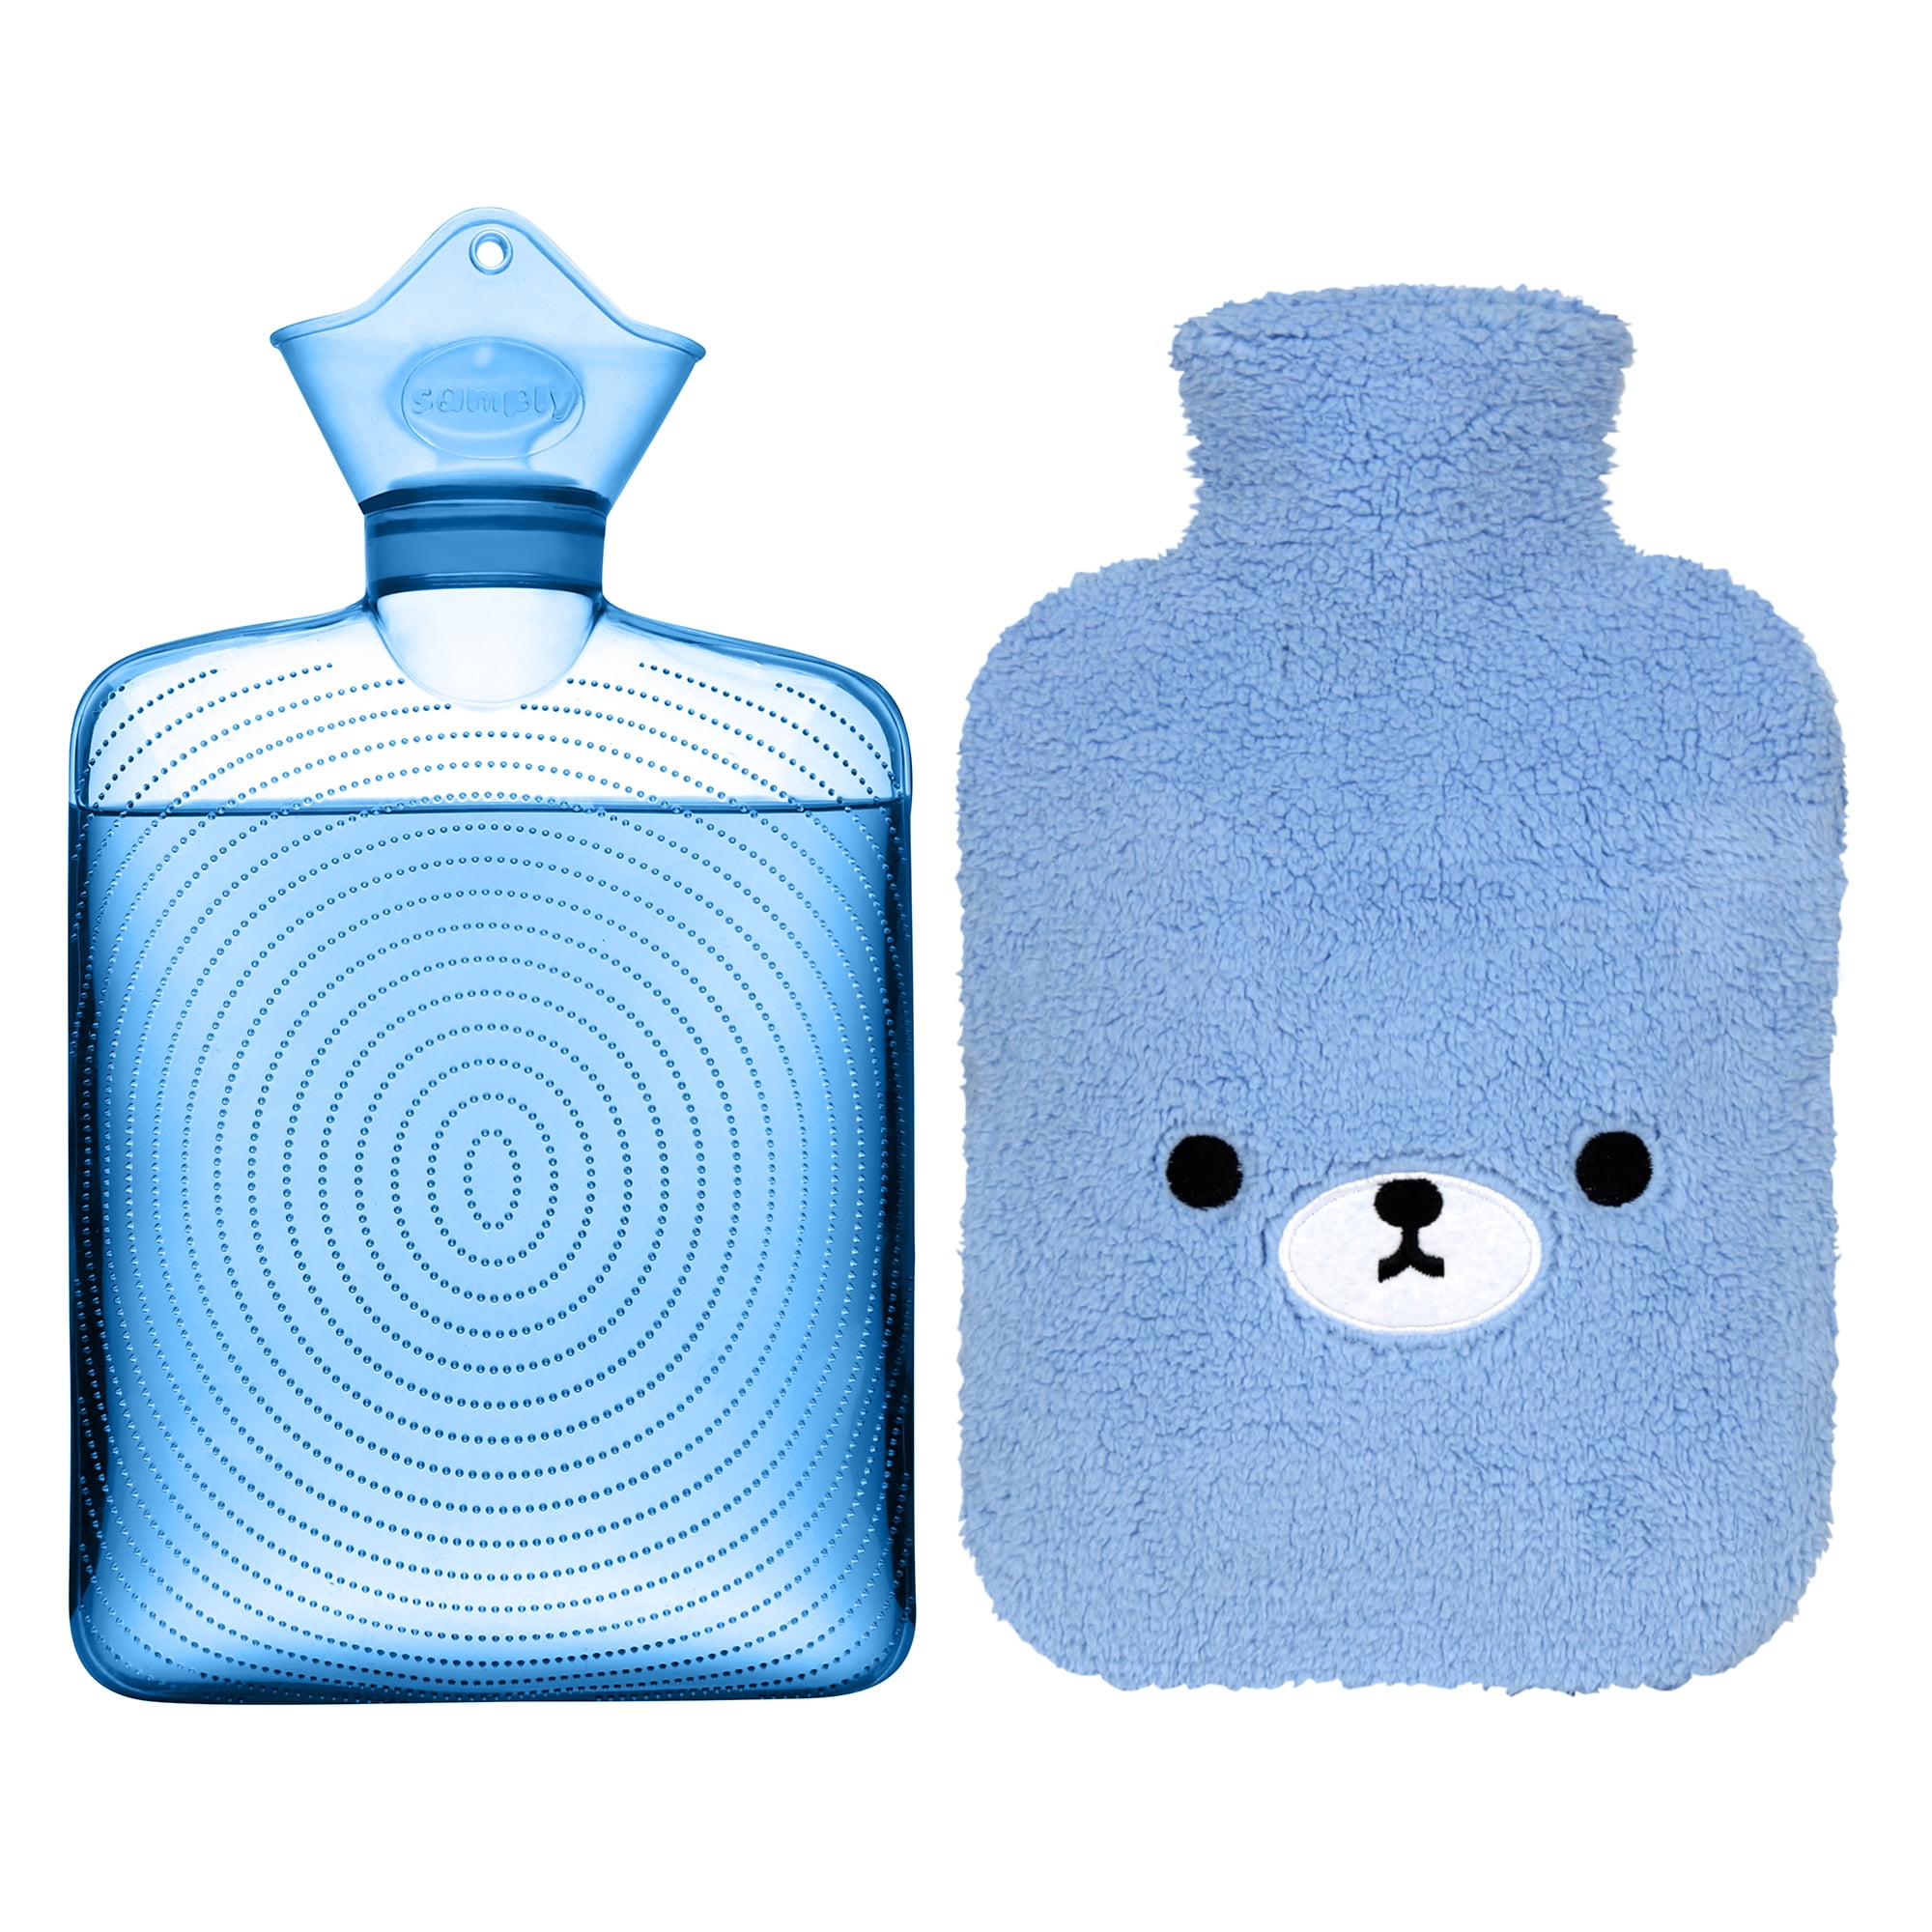 samply Hot Water Bottle with Cute Fleece Cover, 2L Hot Water Bag